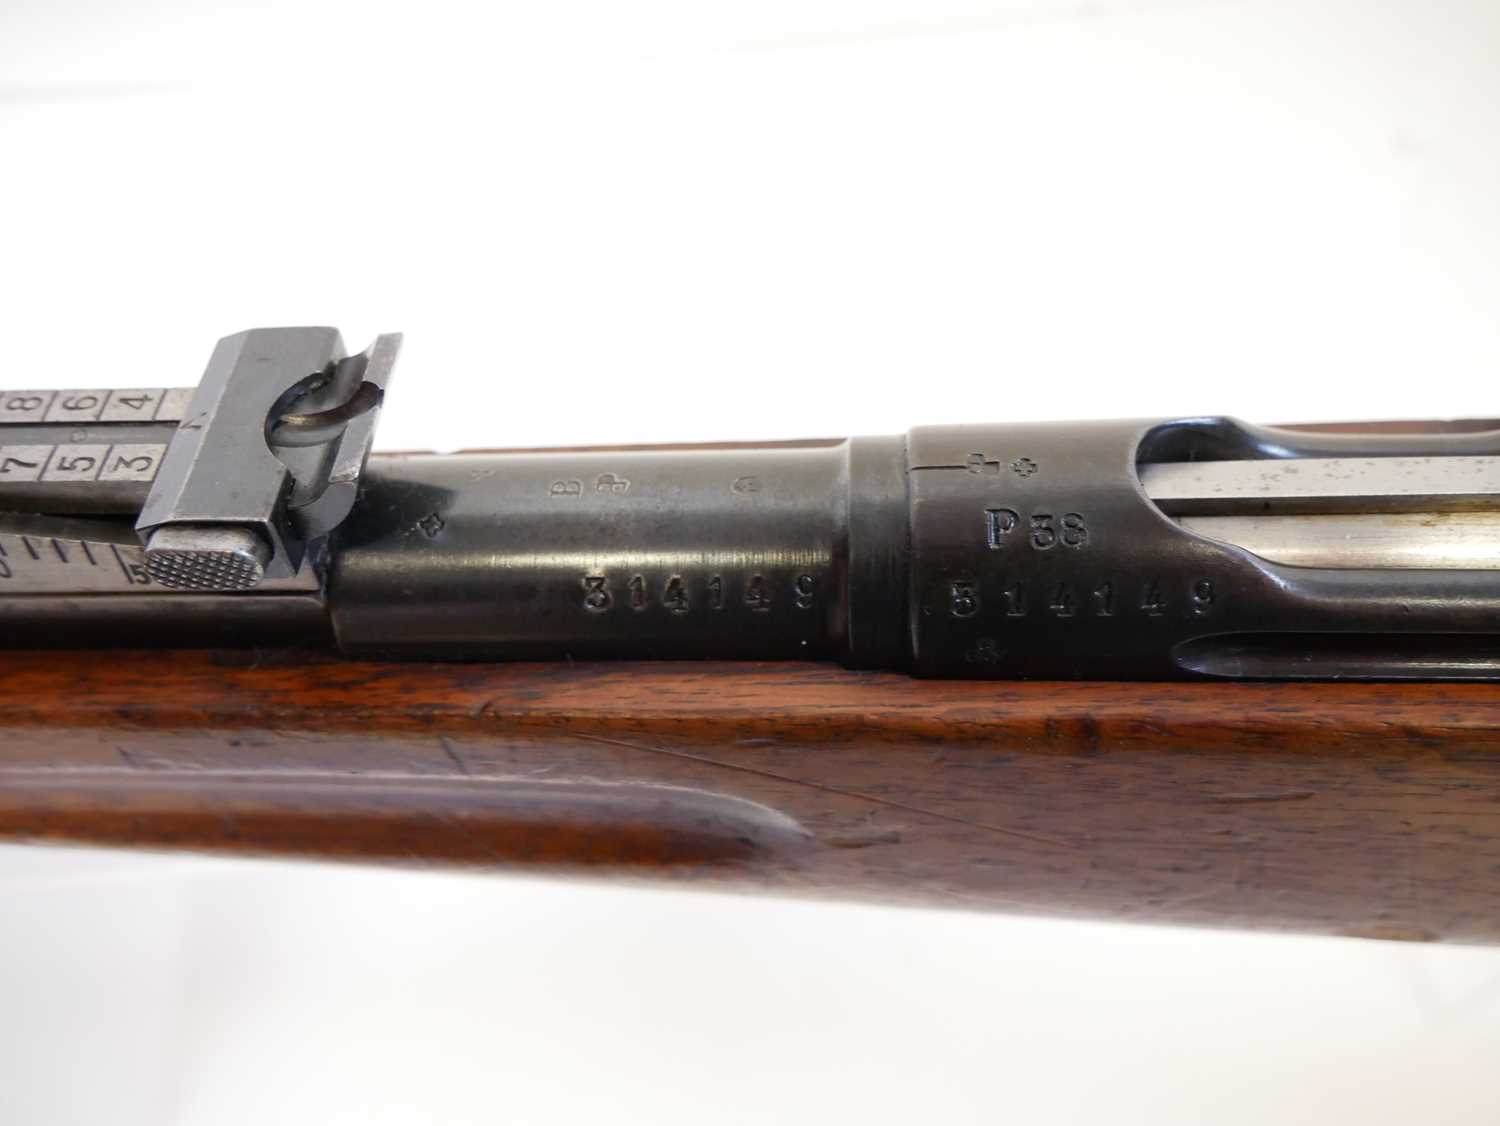 Schmidt Rubin 1896/ 1911 7.5mm straight pull rifle, matching serial numbers 314149 to barrel, - Image 18 of 20